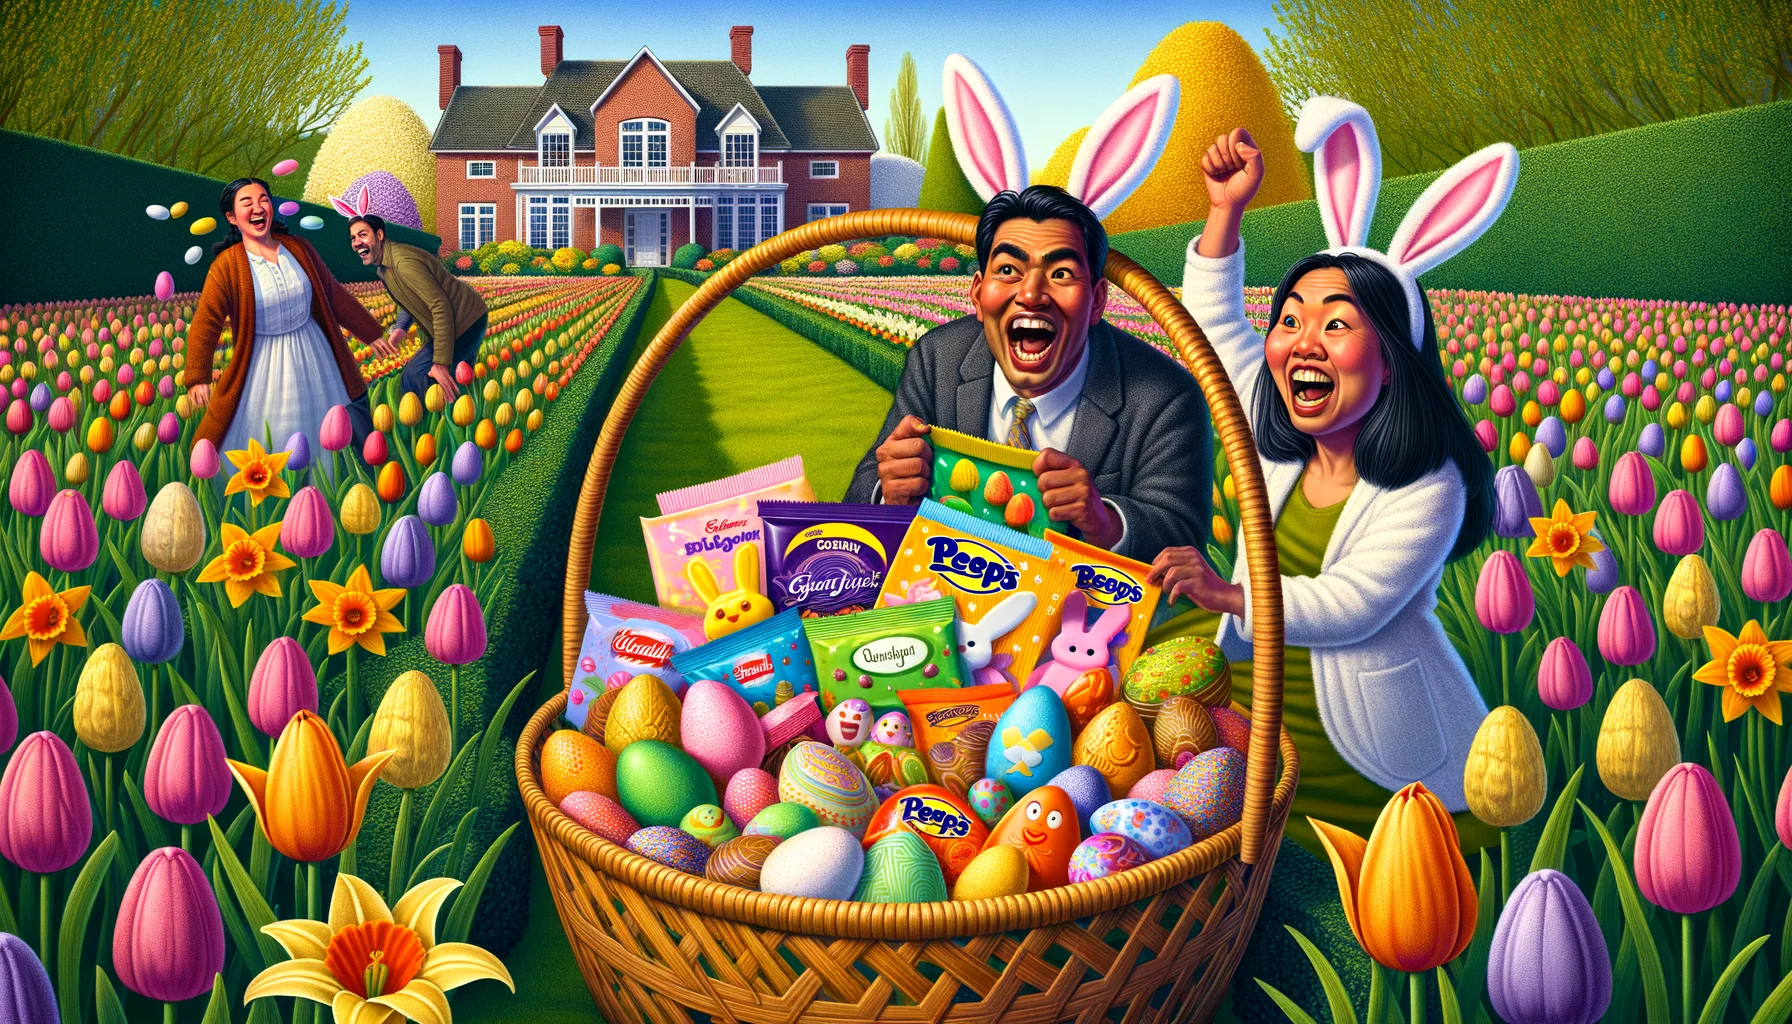 Create a comically realistic scene featuring a blend of Eastern and Western cultures celebrating Easter. In the middle of a vibrant spring garden littered with blooming tulips and daffodils, a large bamboo basket sits teeming with traditional Easter sweets. Make sure that the sweets range from typical Western options like chocolate bunnies and colorful marshmallow peeps to Eastern sweets such as gulab jamun and matcha-flavored mochi, showing a fusion of cultures. Add hilarious characterisations of a South Asian woman and a Hispanic man wearing bunny ears, engaged in a playful egg hunt with excessive enthusiasm, their pockets already bulging with found eggs.